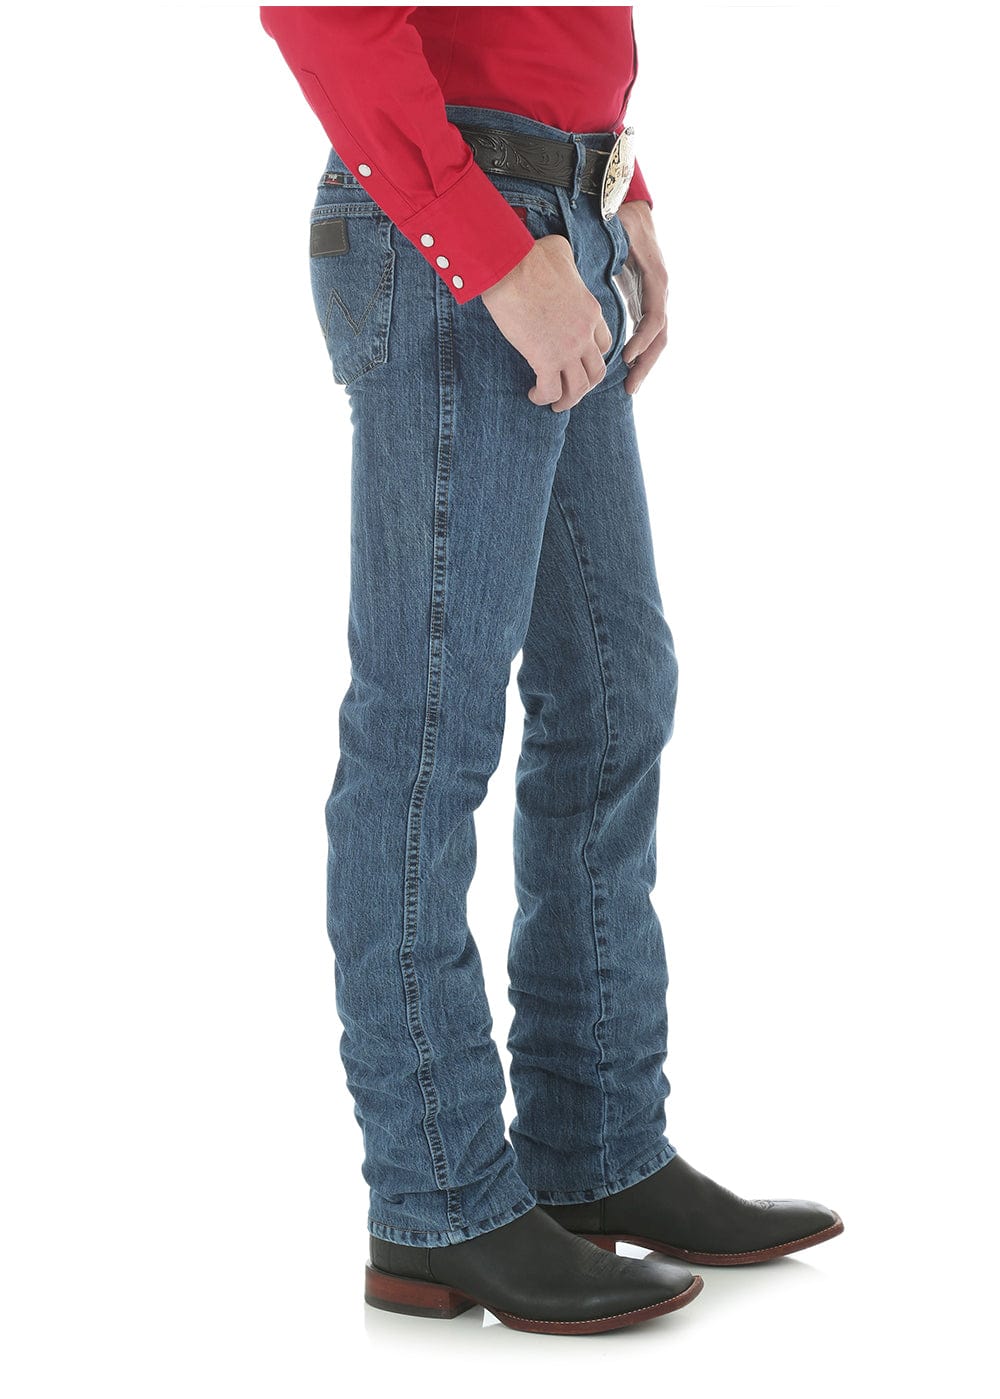 WRANGLER JEANS Mens PBR Bootcut Slim Fit Jean | Authentic Stone